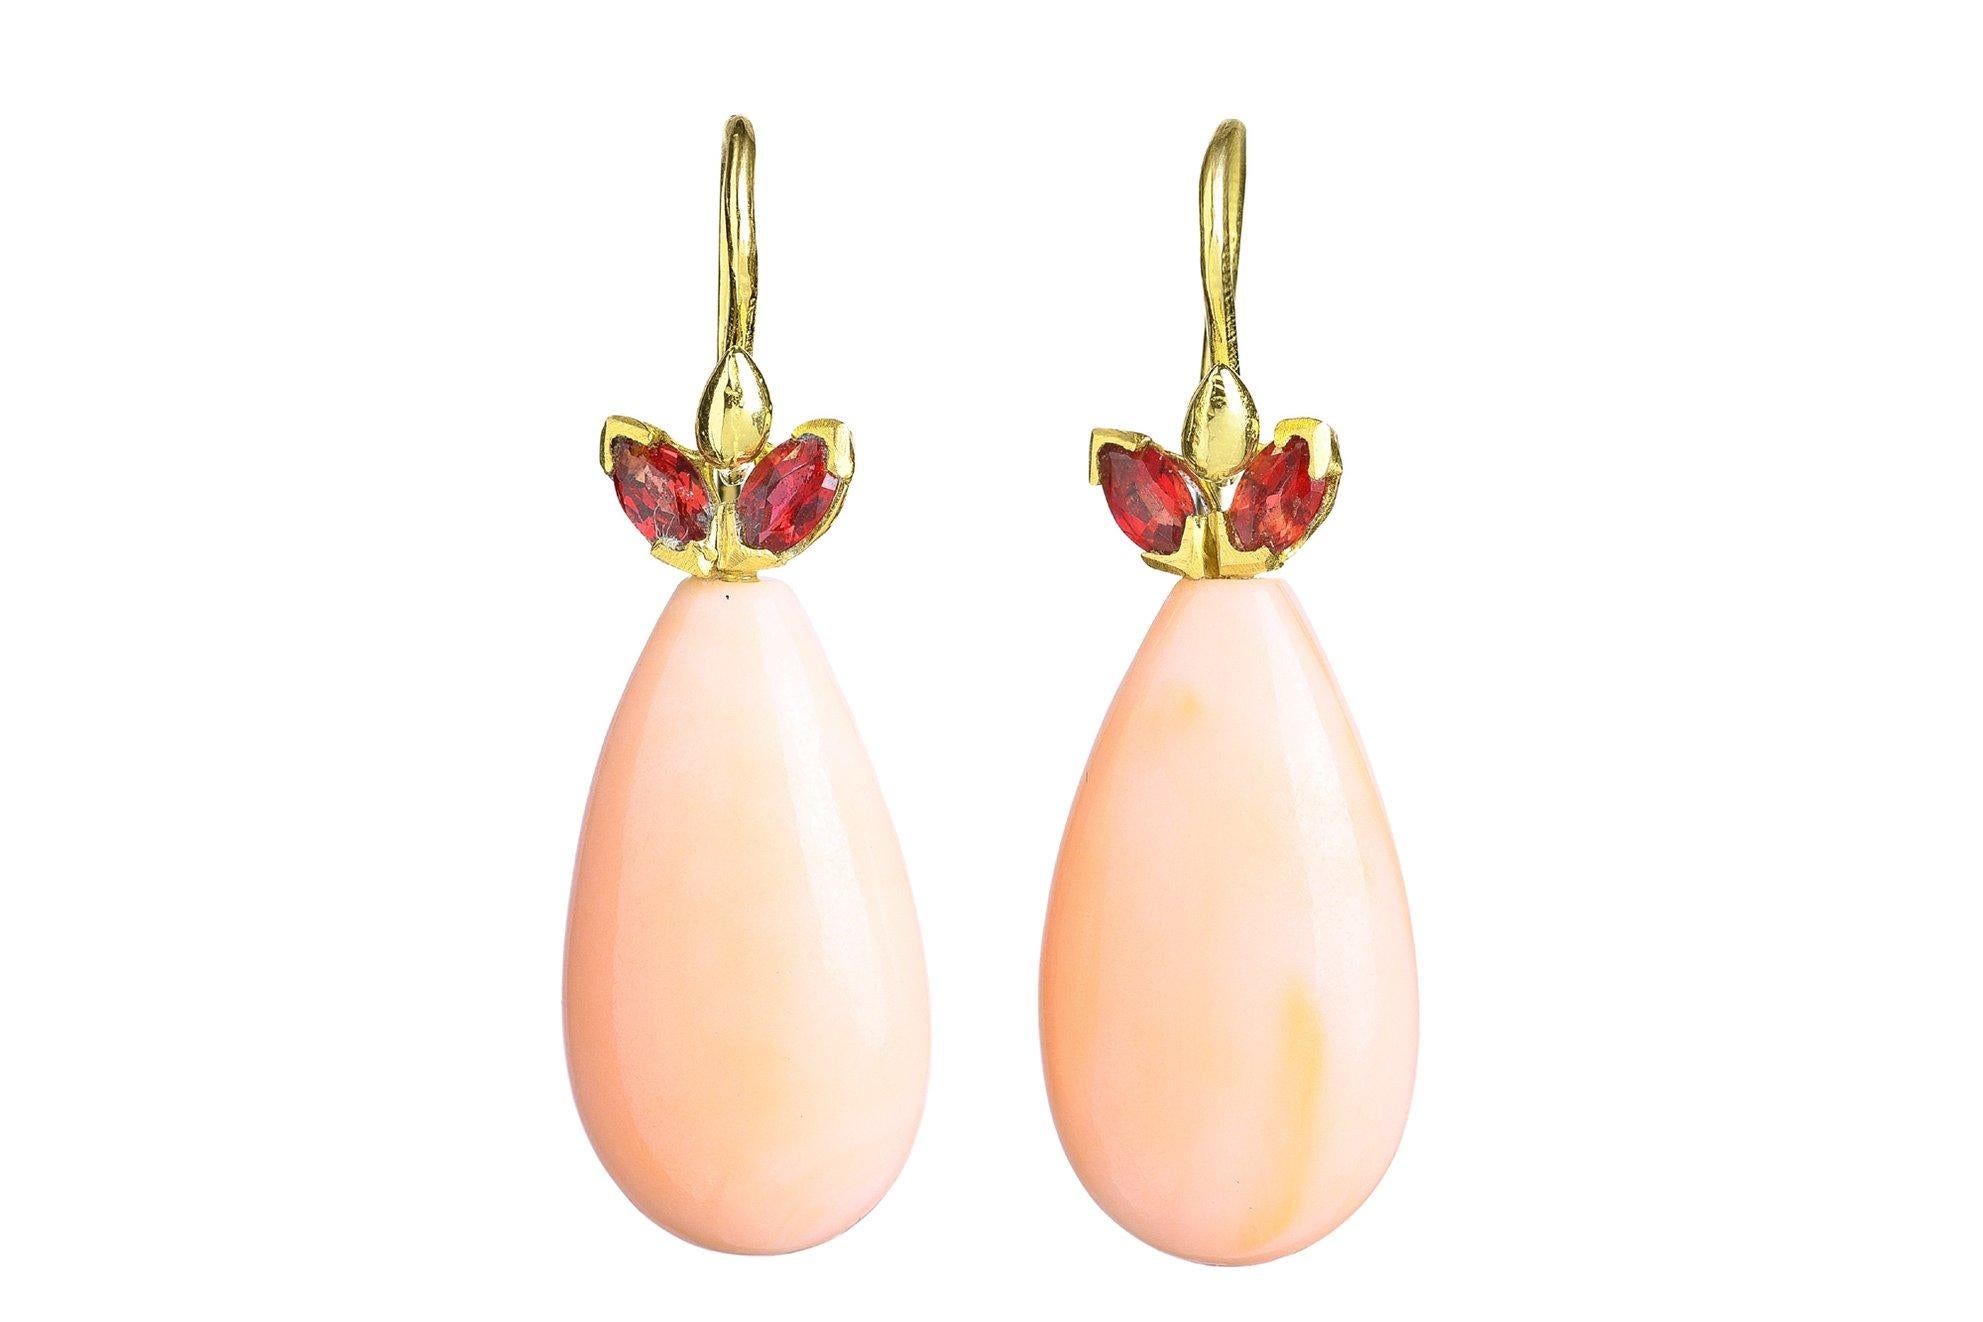 Crimson sapphire wings elevate these pure pale angel pink antique coral teardrop earrings. Wear everyday or on the most special of occasions.

22x12.5mm smooth antique pink coral teardrop topped with crimson marquis sapphire 18k wings and smooth